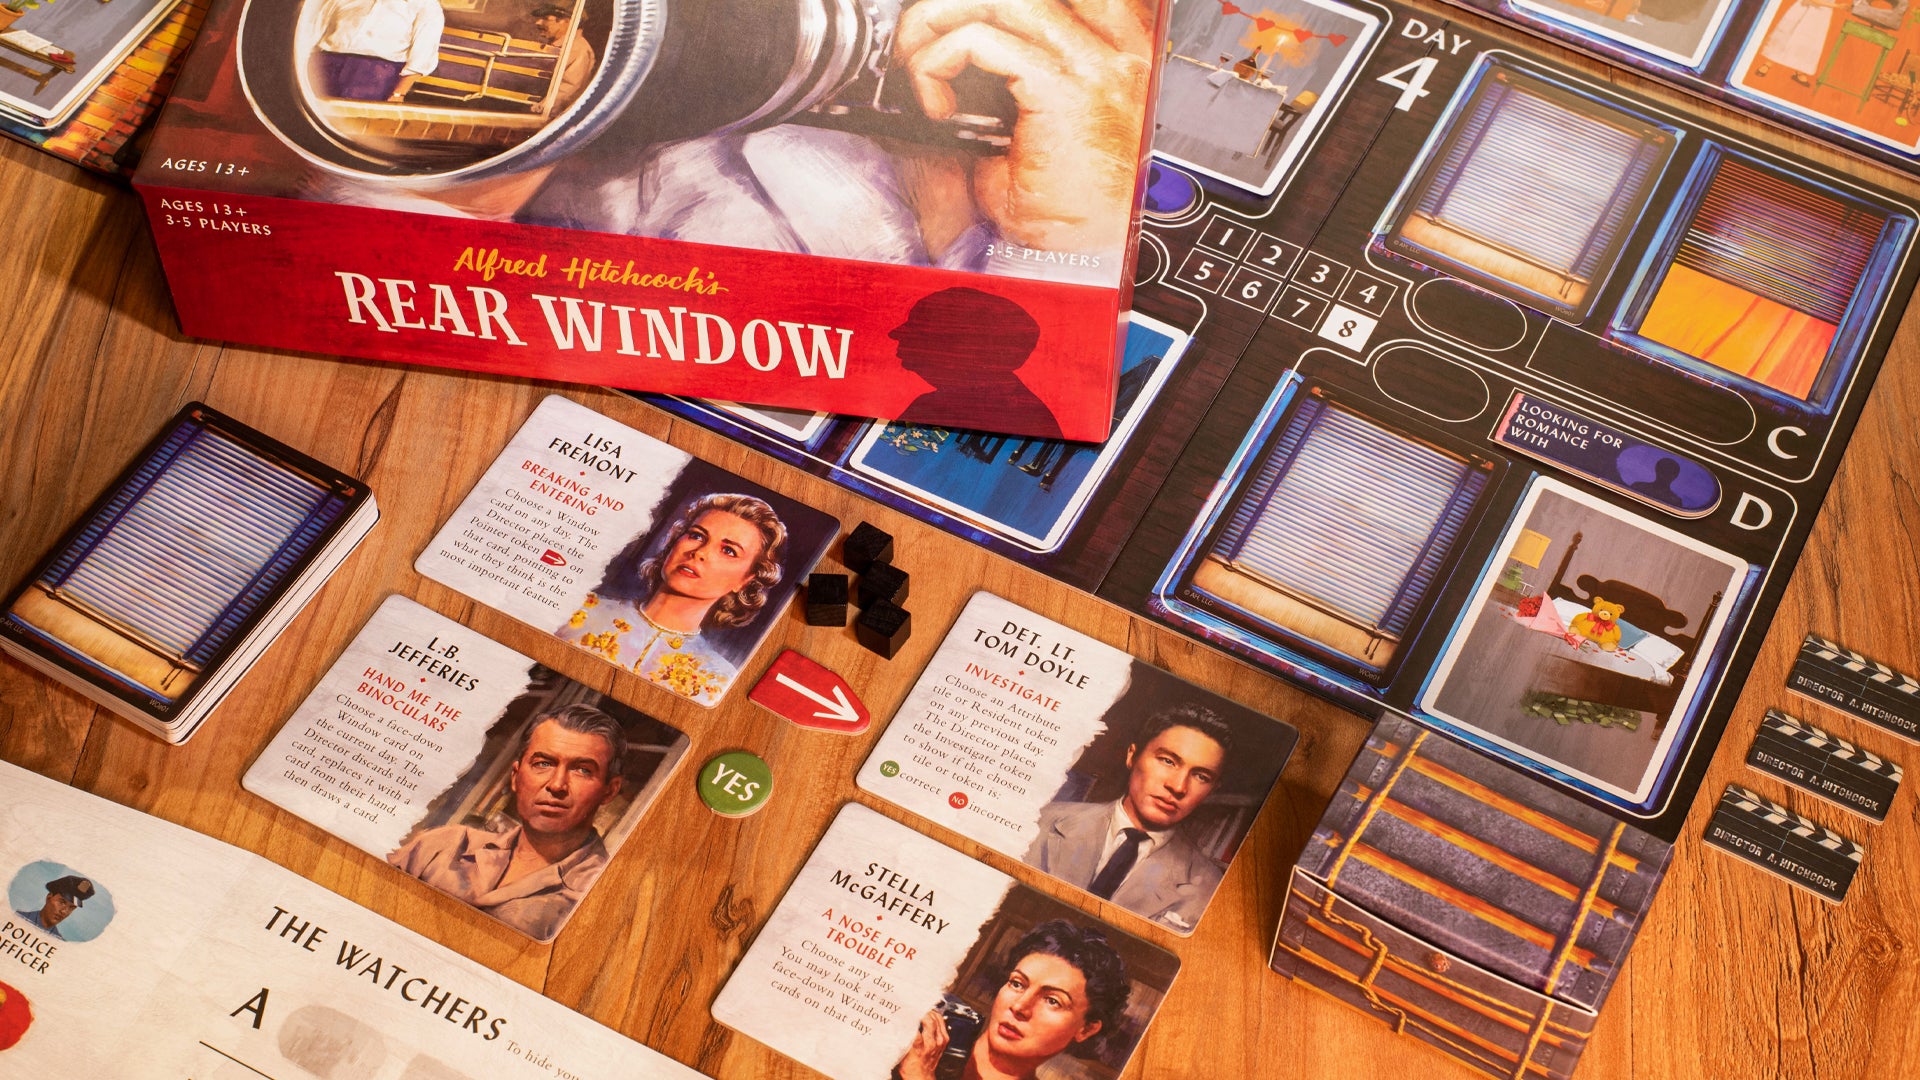 Image for Rear Window, Alfred Hitchcock’s classic thriller film, is being turned into a co-op board game